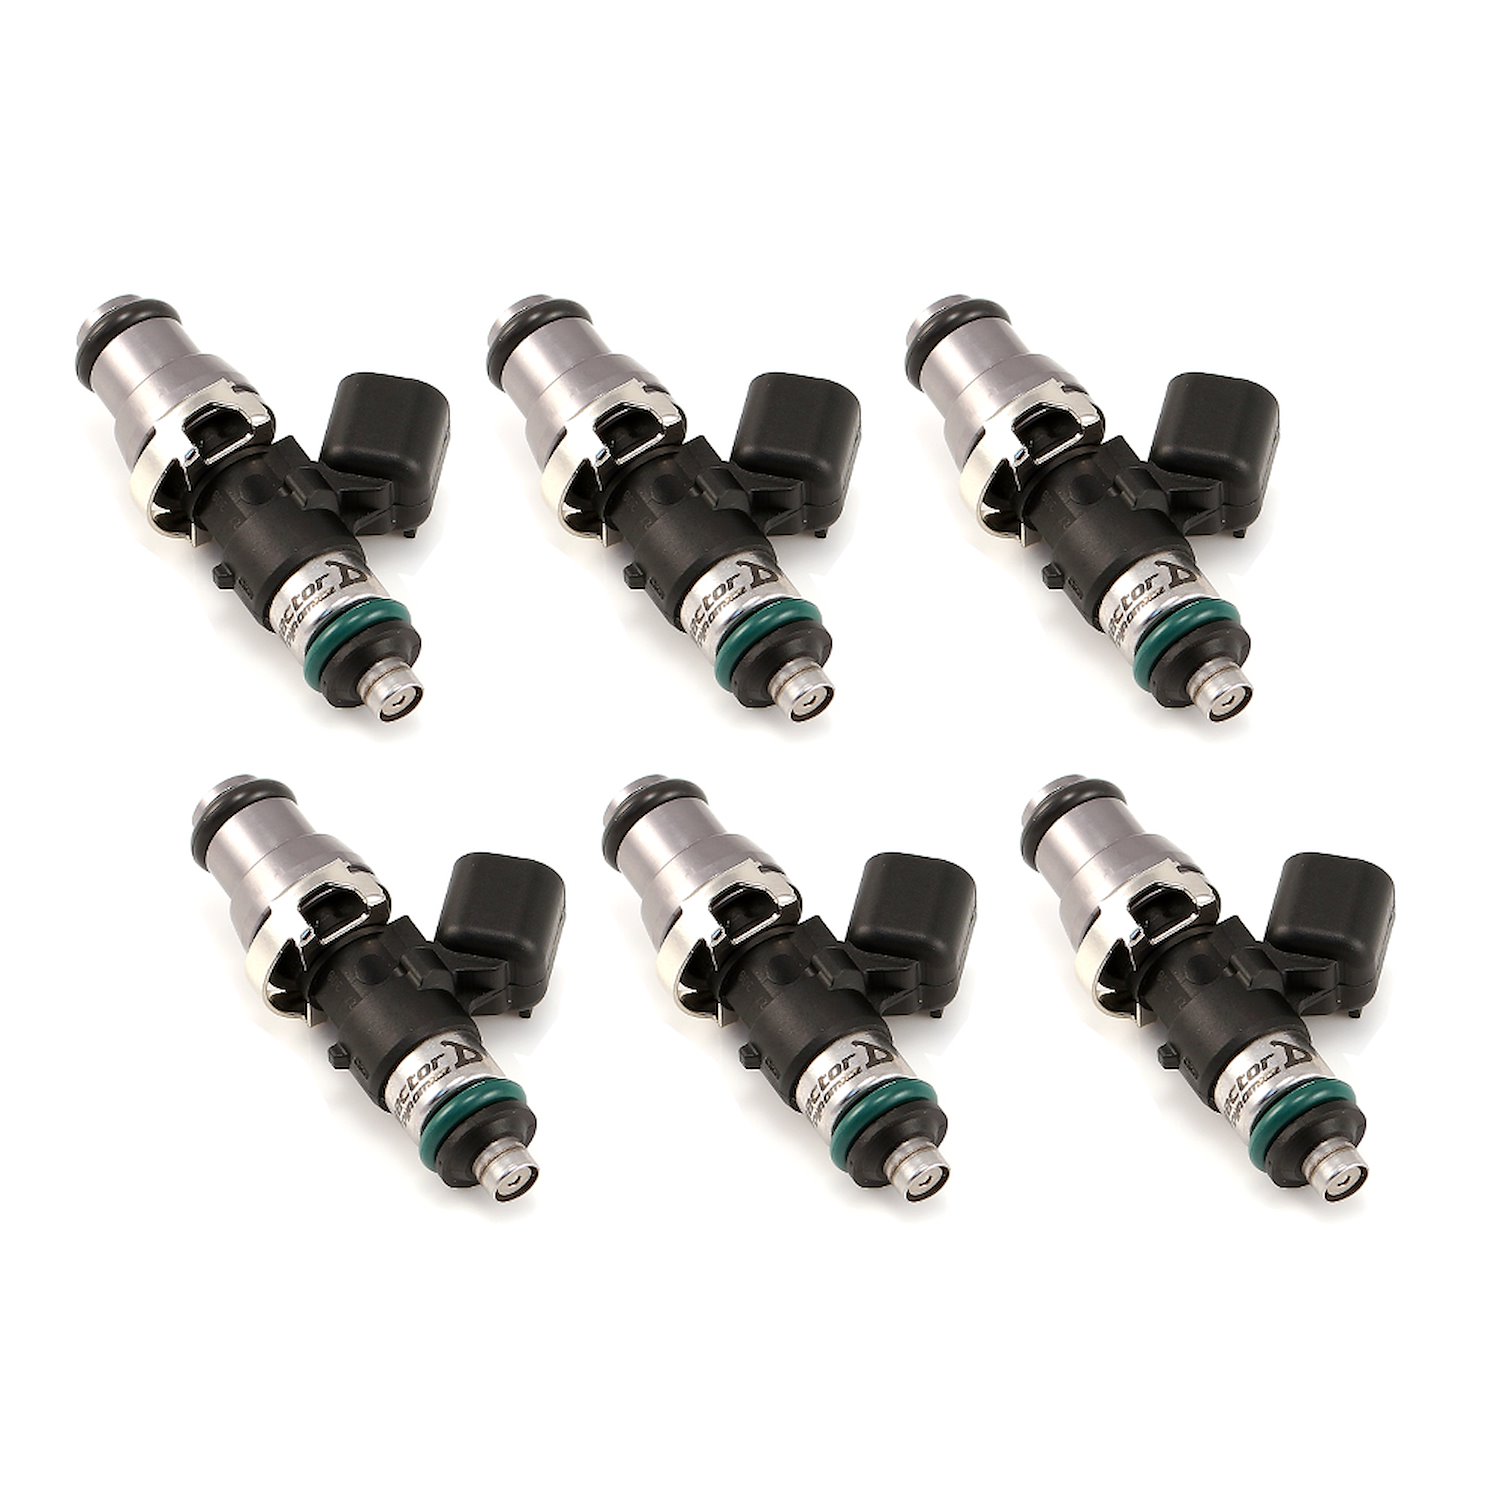 1700.48.14.14.6 1700cc Fuel Injector Set, 48 mm Length, 14 mm Top, 14 mm Lower O-Ring